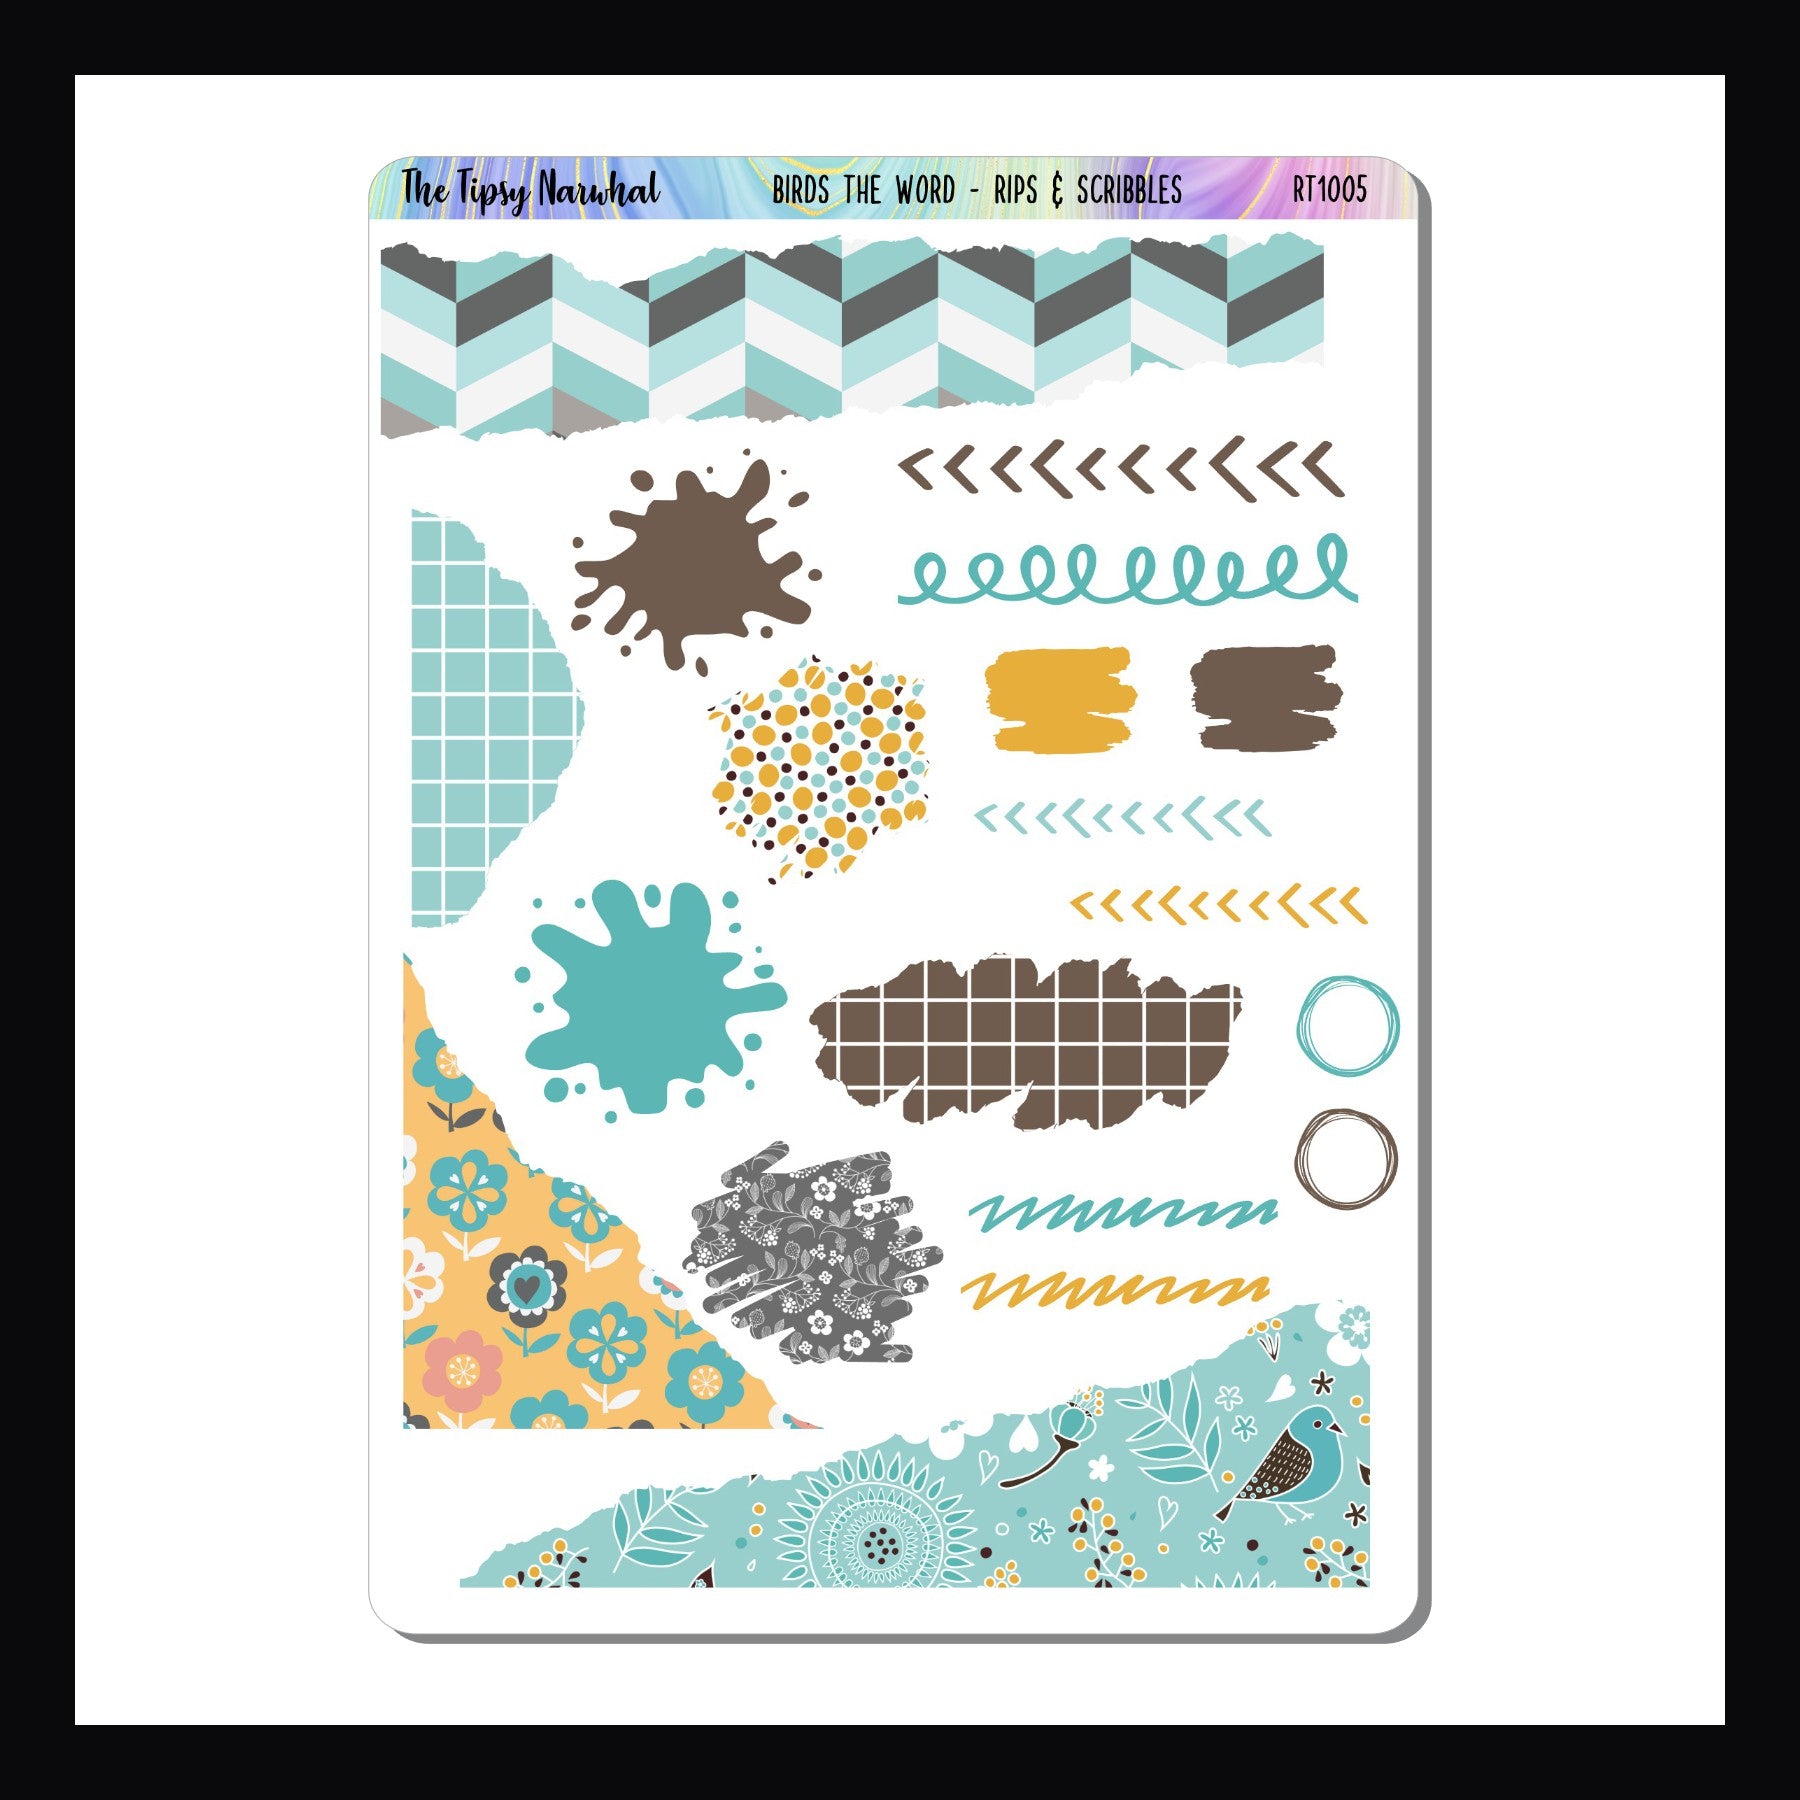 Digital Birds the Word Rips & Scribbles sheet is a digital/printable version of the rips & scribbles sheet of the same name. It features several scribble stickers, some splash stickers, and stickers with a ripped appearance. All coordinate with the Birds the Word kits. 